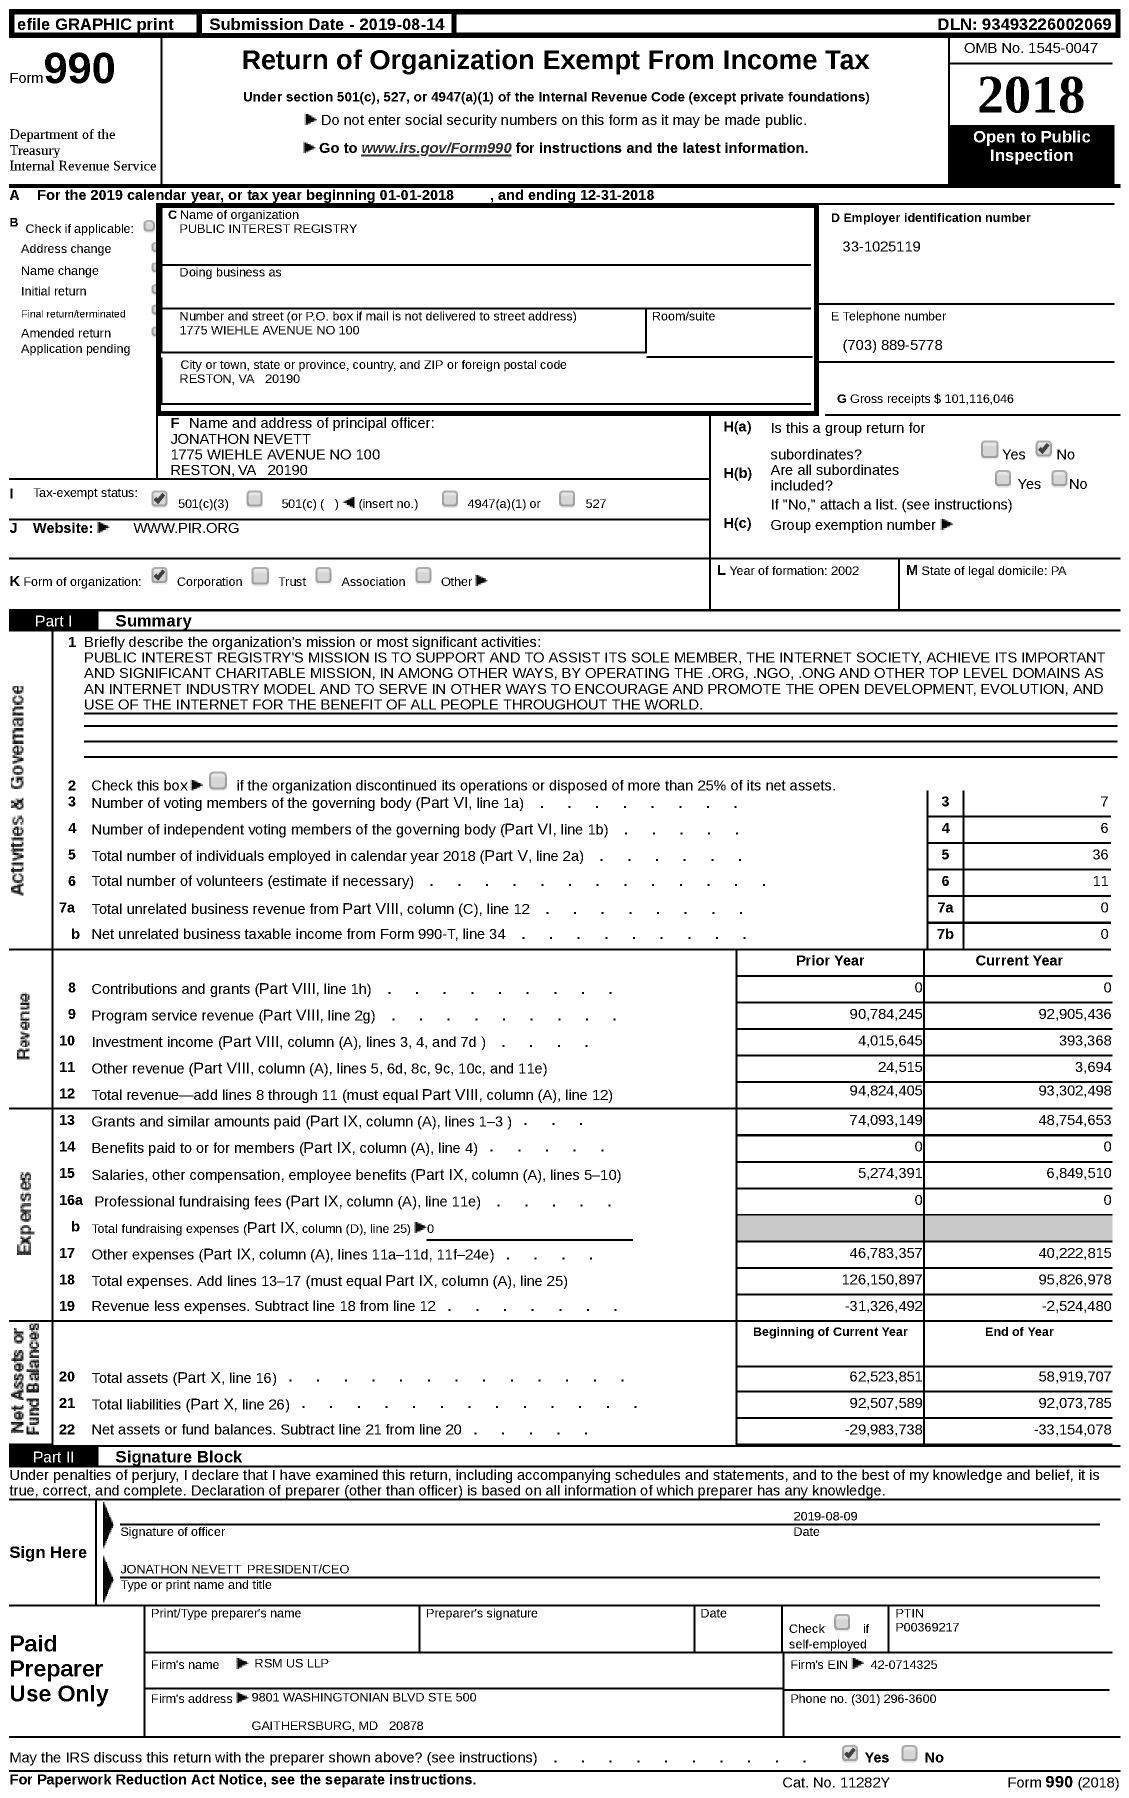 Image of first page of 2018 Form 990 for Public Interest Registry (PIR)